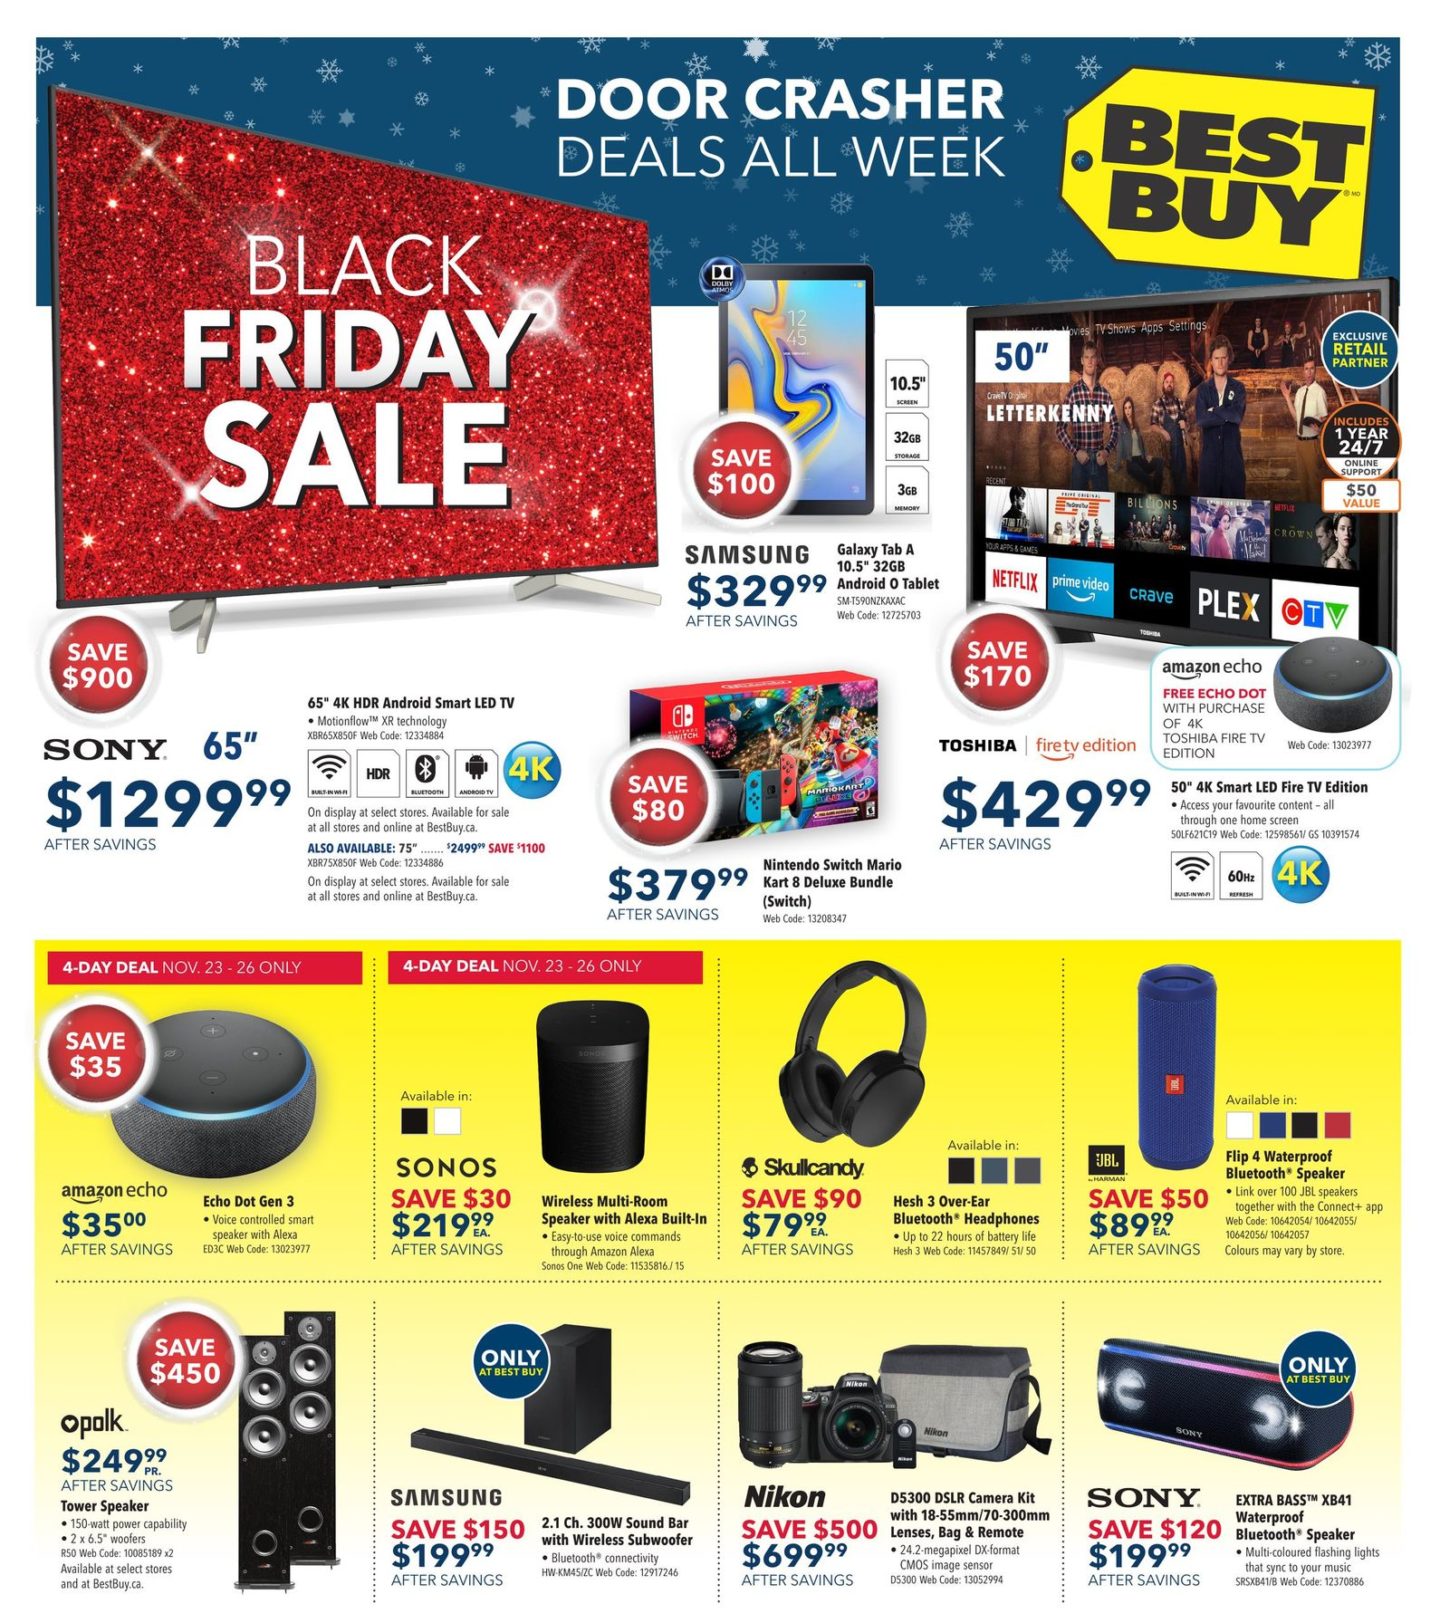 Best Buy Black Friday Flyer Deals 2019 Canada - What To Buy On Black Friday Deals